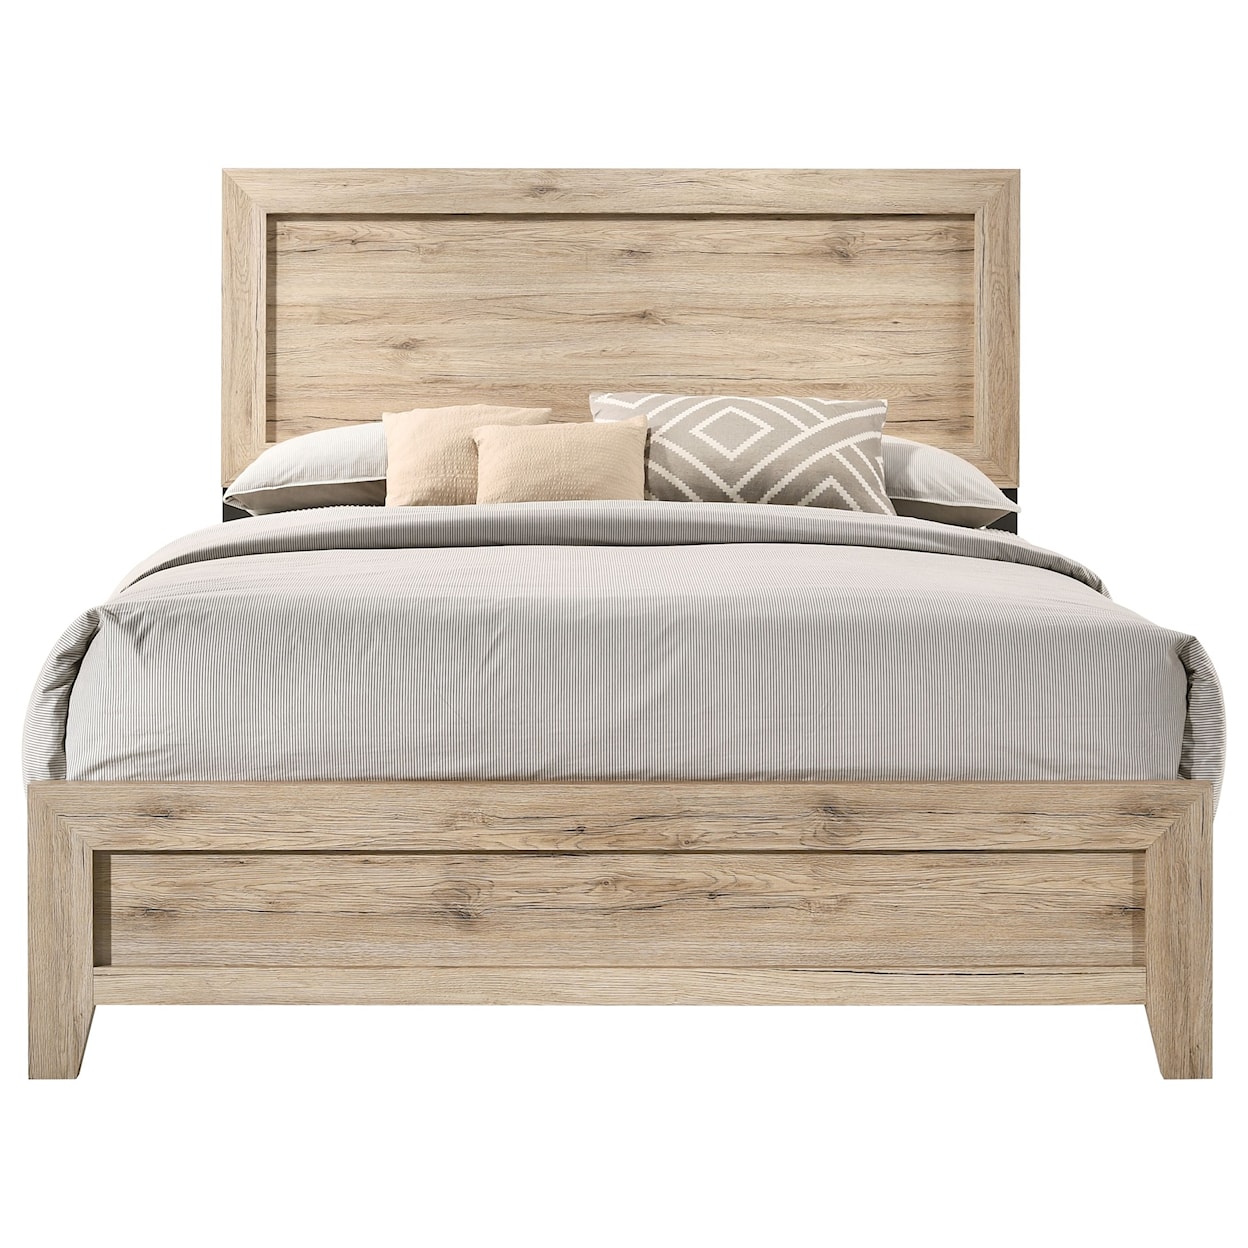 Acme Furniture Miquell King Panel Bed